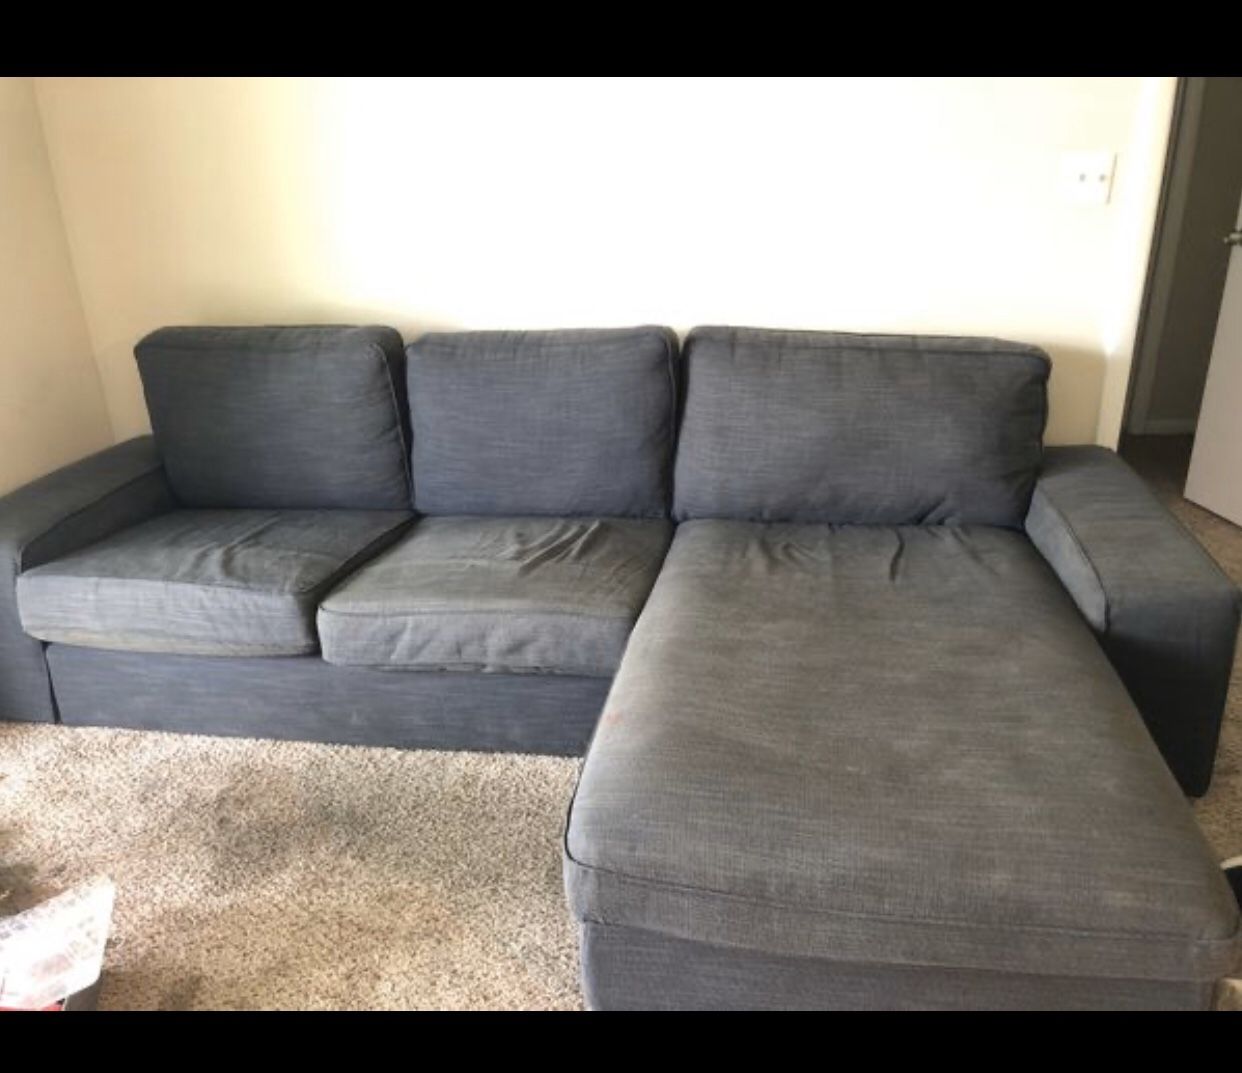 Free couch!!!!